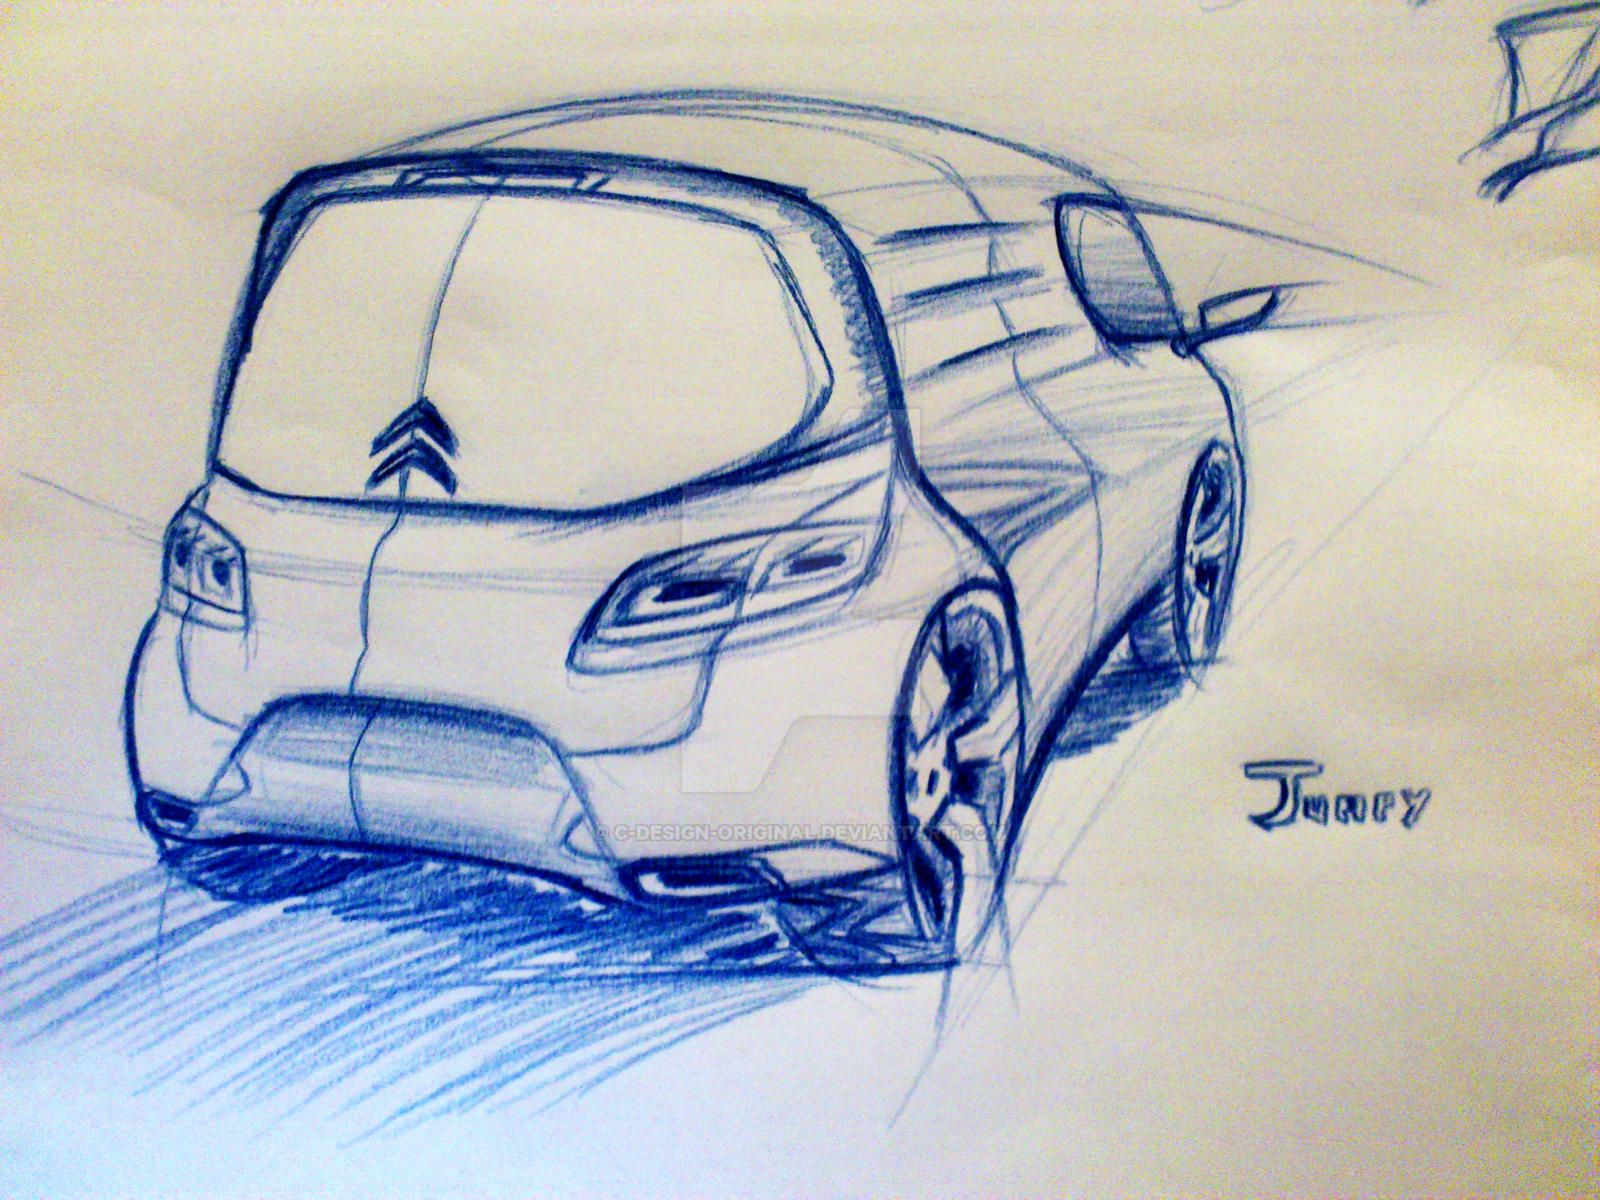 Citroen Jumpy Directly Inspired By Tubik